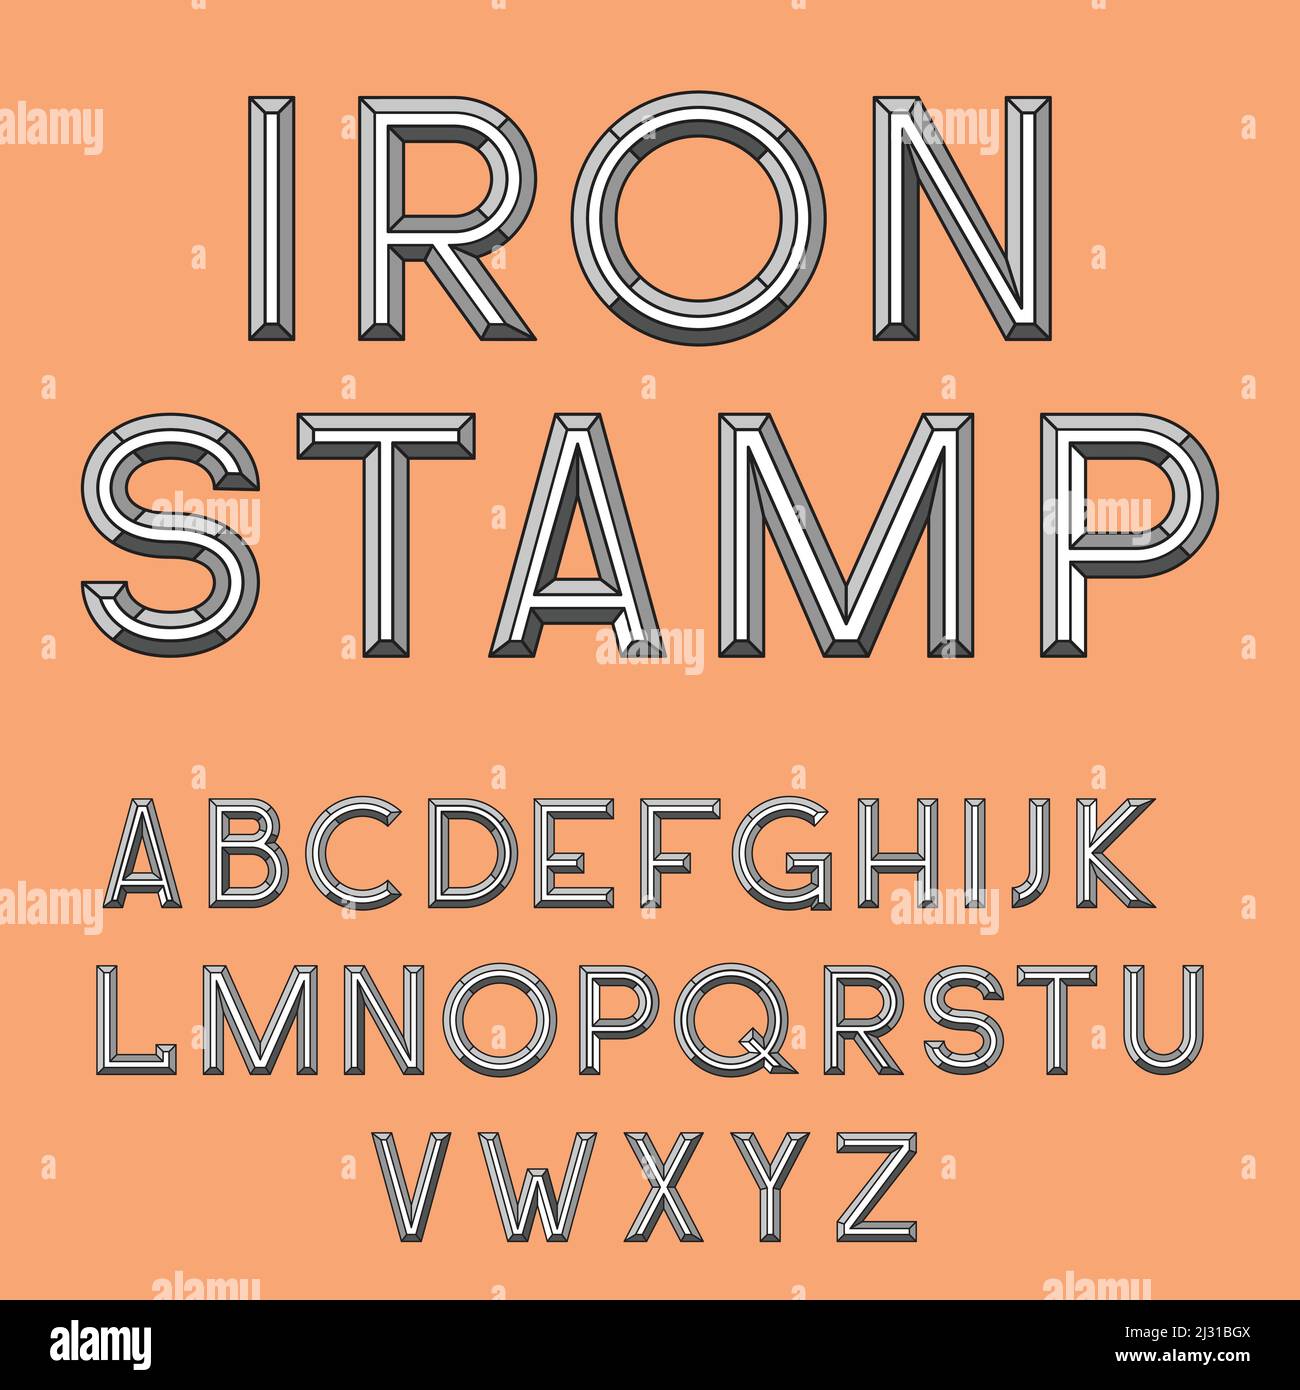 Metal stamp font retro vector illustration. Set of unique decorative 3D type, capital calligraphic alphabet, typography letterpress isolated on backgr Stock Vector